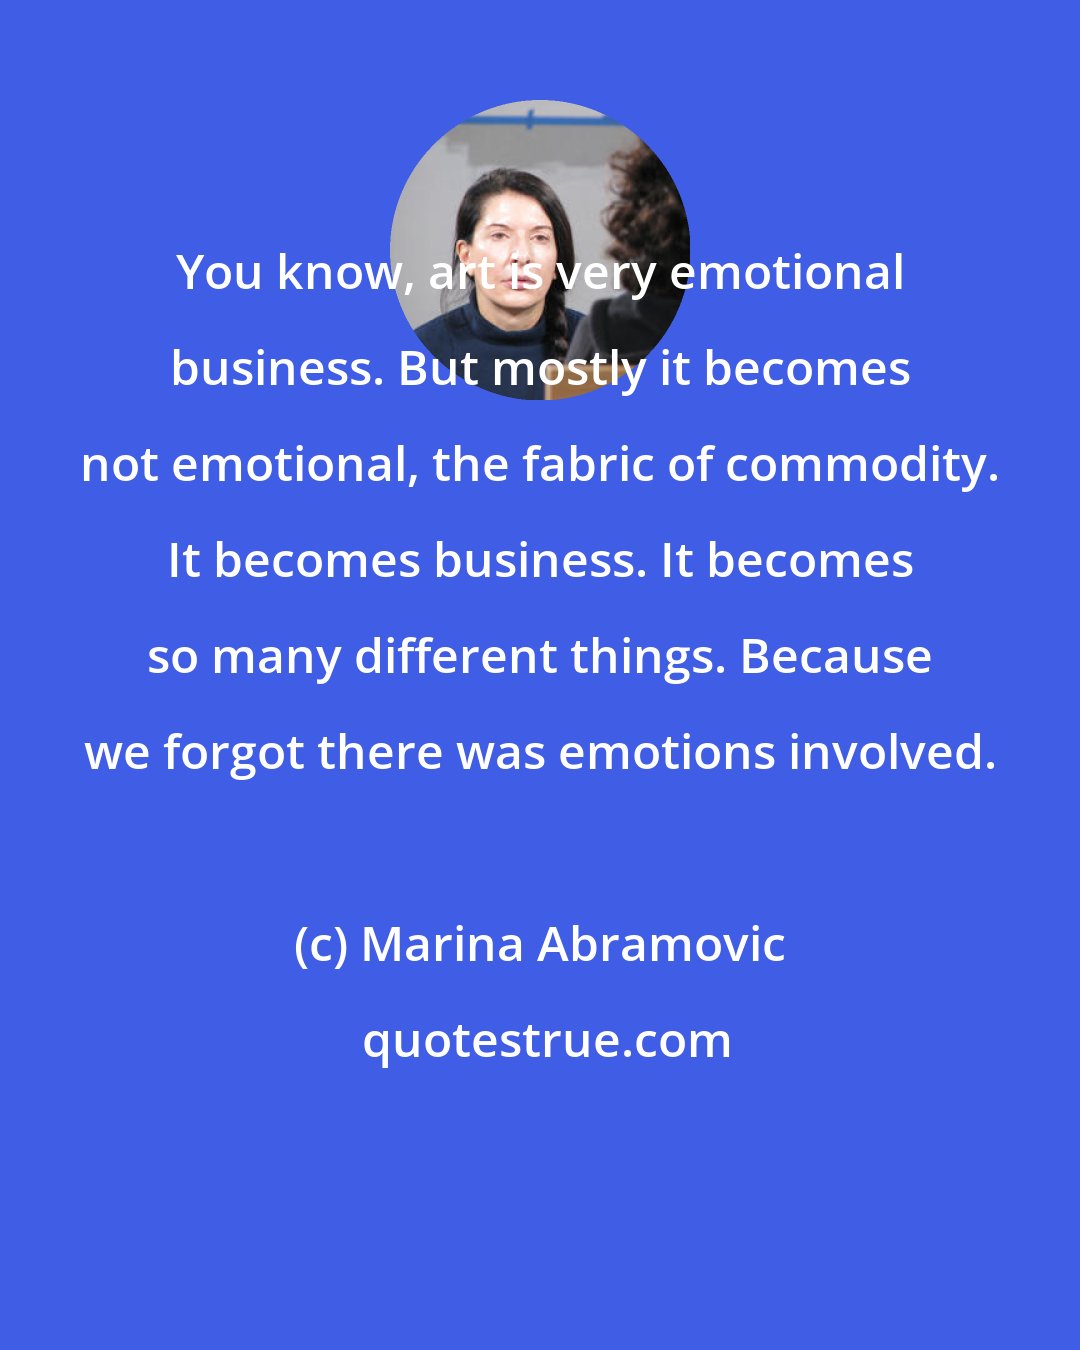 Marina Abramovic: You know, art is very emotional business. But mostly it becomes not emotional, the fabric of commodity. It becomes business. It becomes so many different things. Because we forgot there was emotions involved.